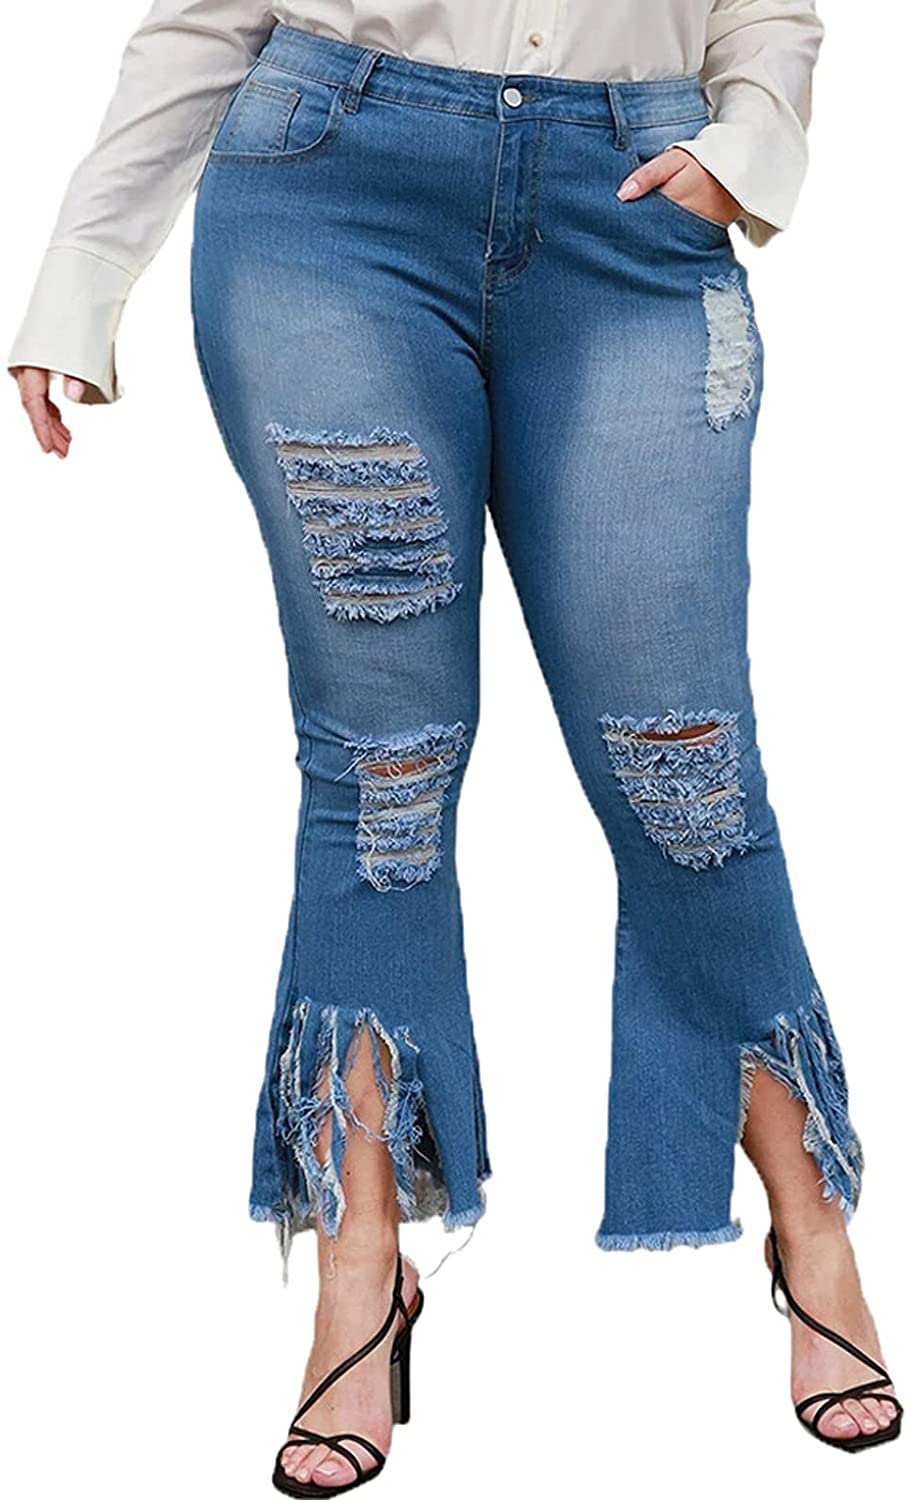 SeNight Plus Size Bell Bottom Jeans for Women Ripped Flared Bell Bottom Jean Classic Pants XL-5XL